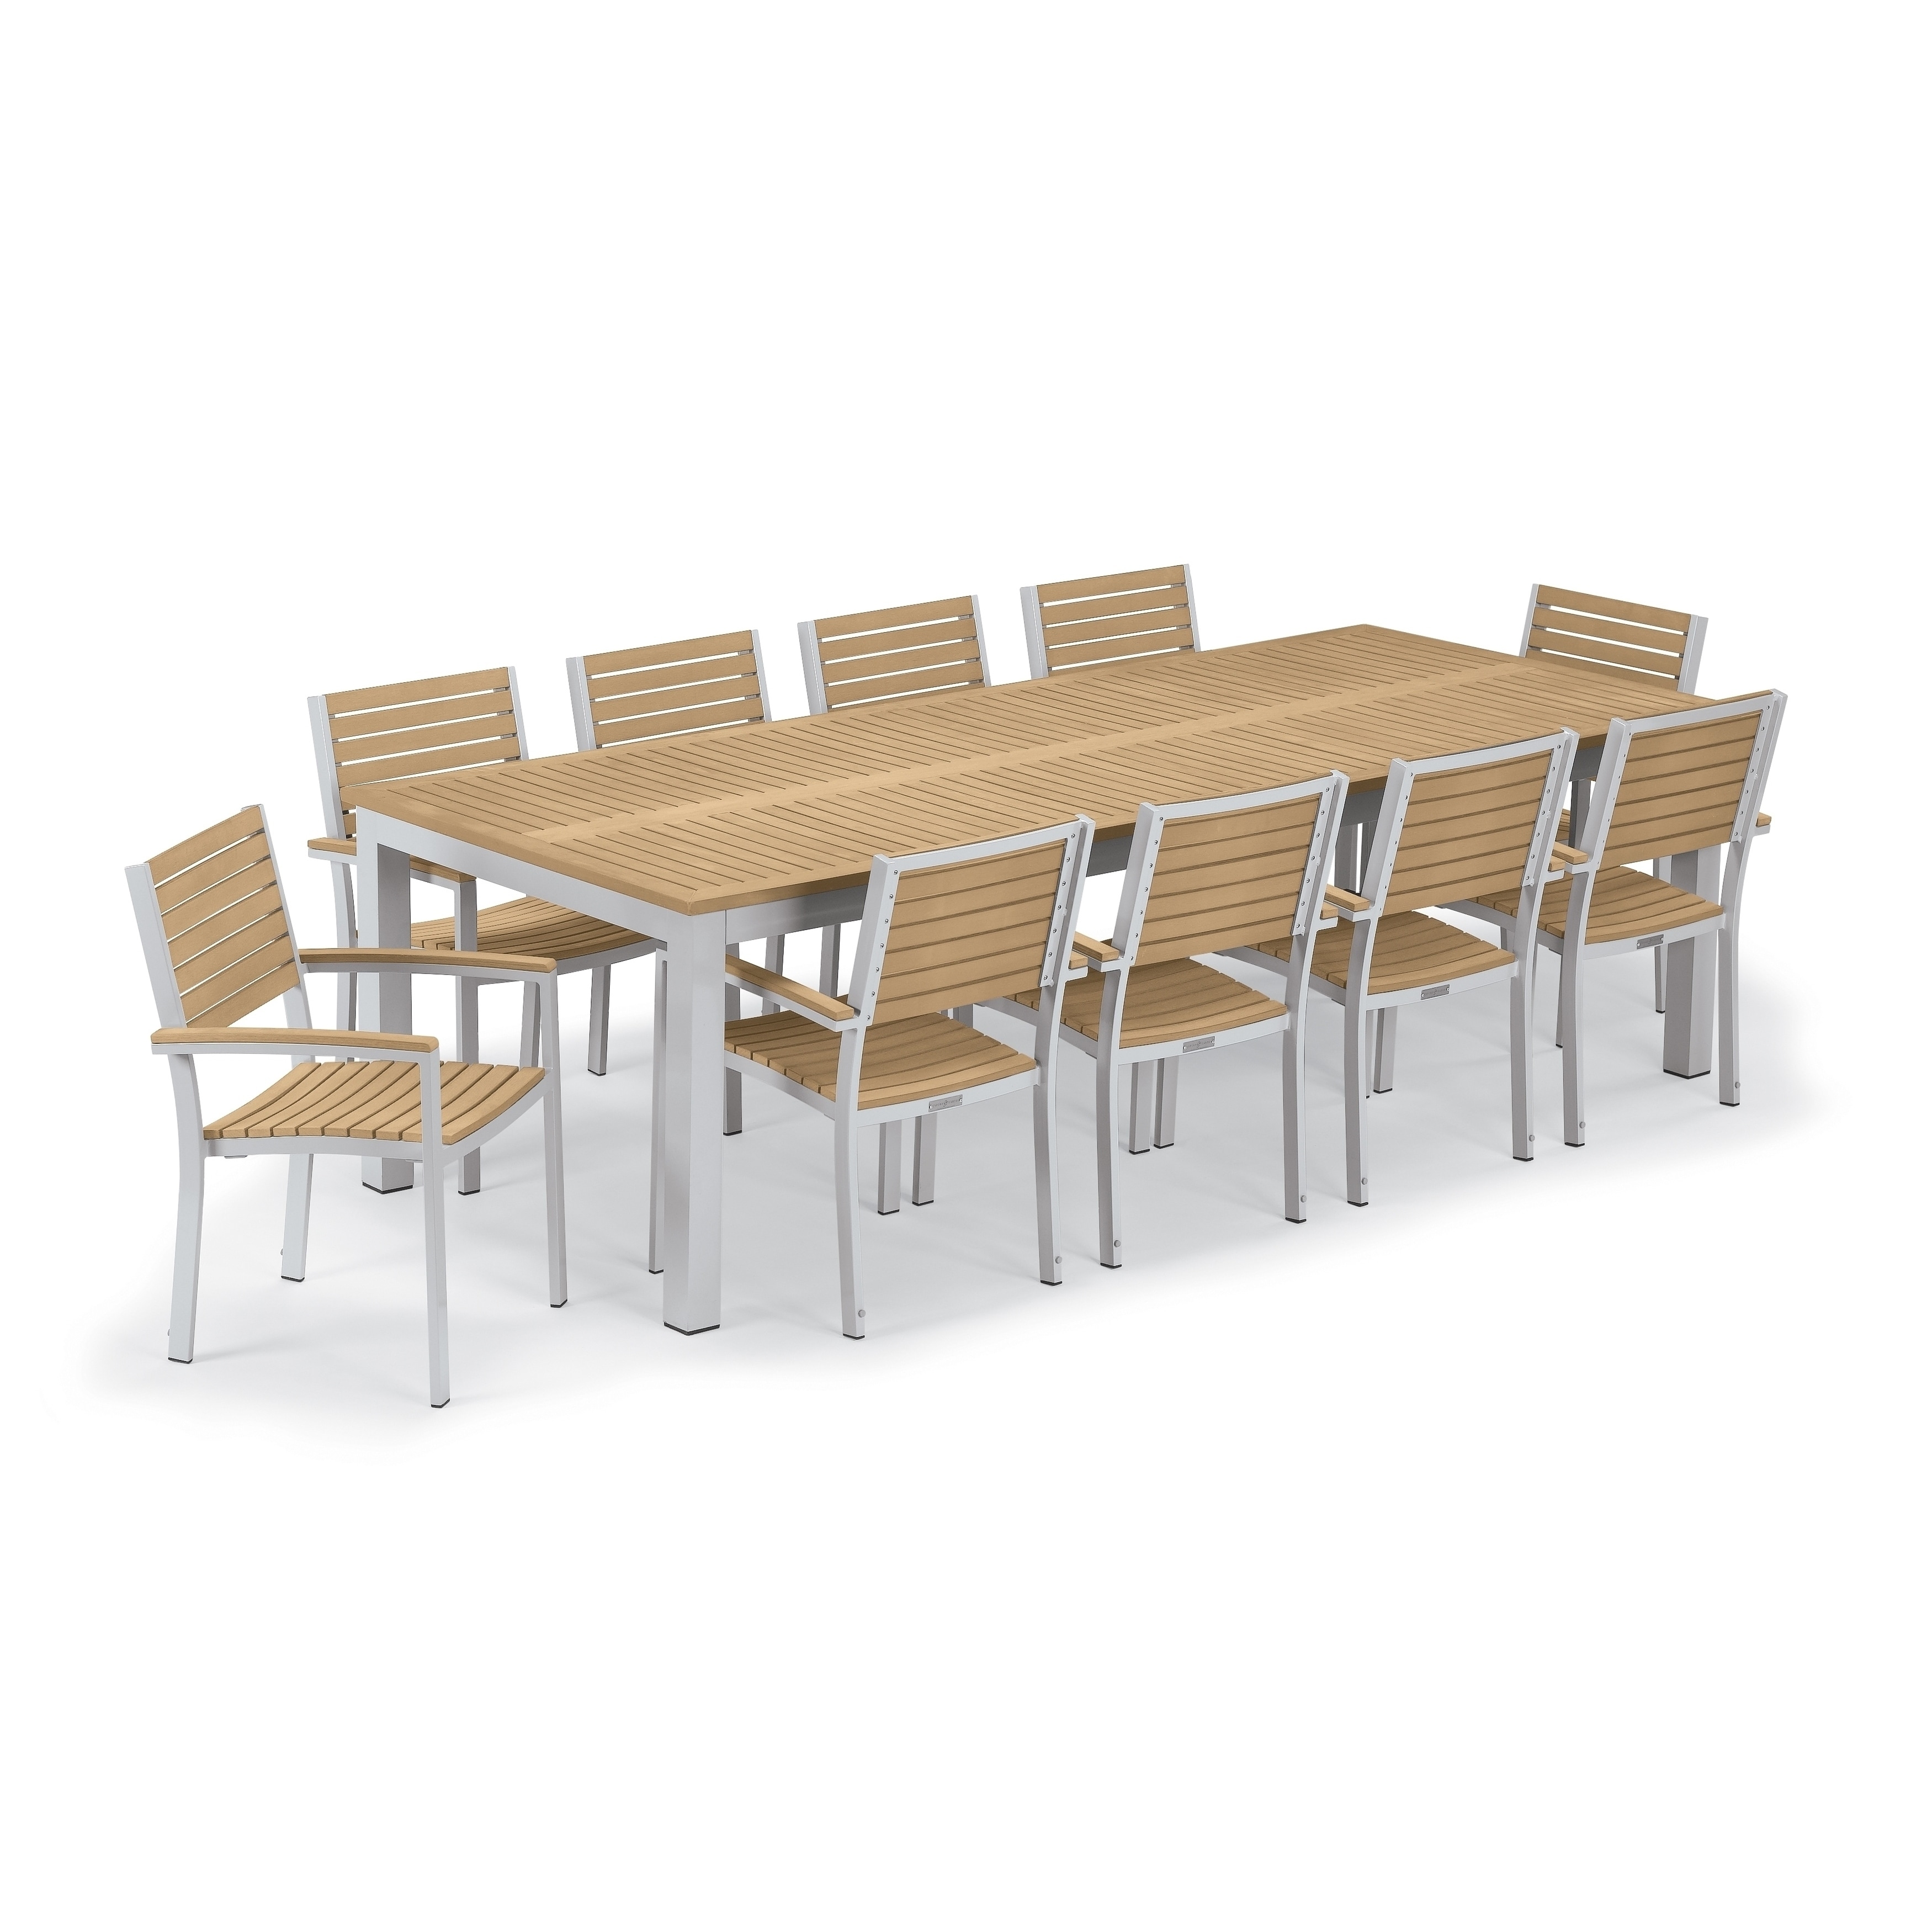 Oxford Garden Travira 11-piece 103-in X 42-in Tekwood Natural Table and Slat Armchair Dining Set